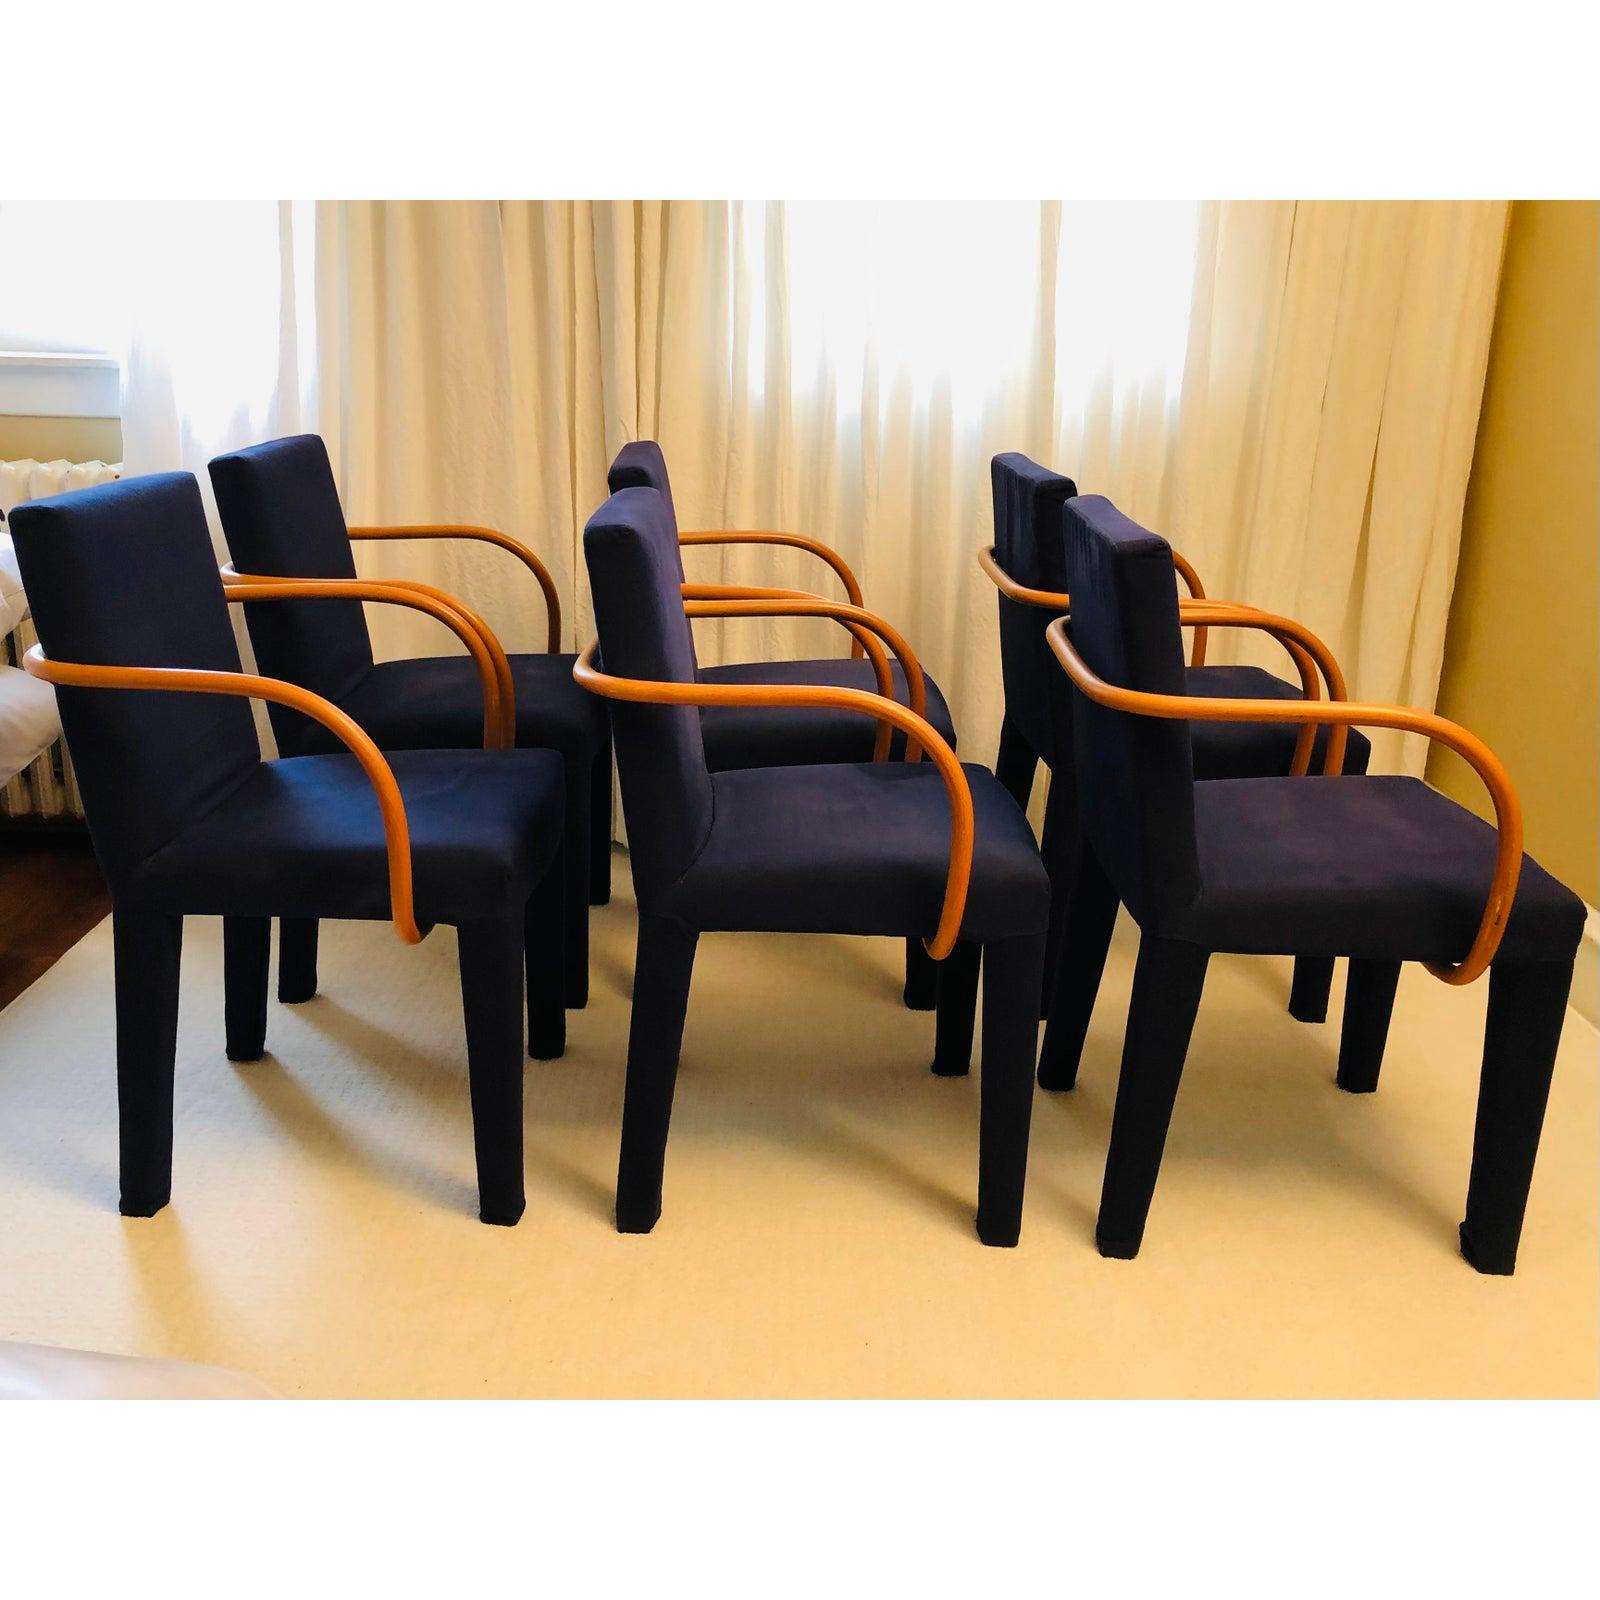 Set of 6 B&B Italia chairs designed by Antonio Citterio. 

The chairs have removable covers in dark purple, replete with B & B tags.

The frame consists of tubes and a steel profile and flexible polyurethane foam that is shaped coldly.